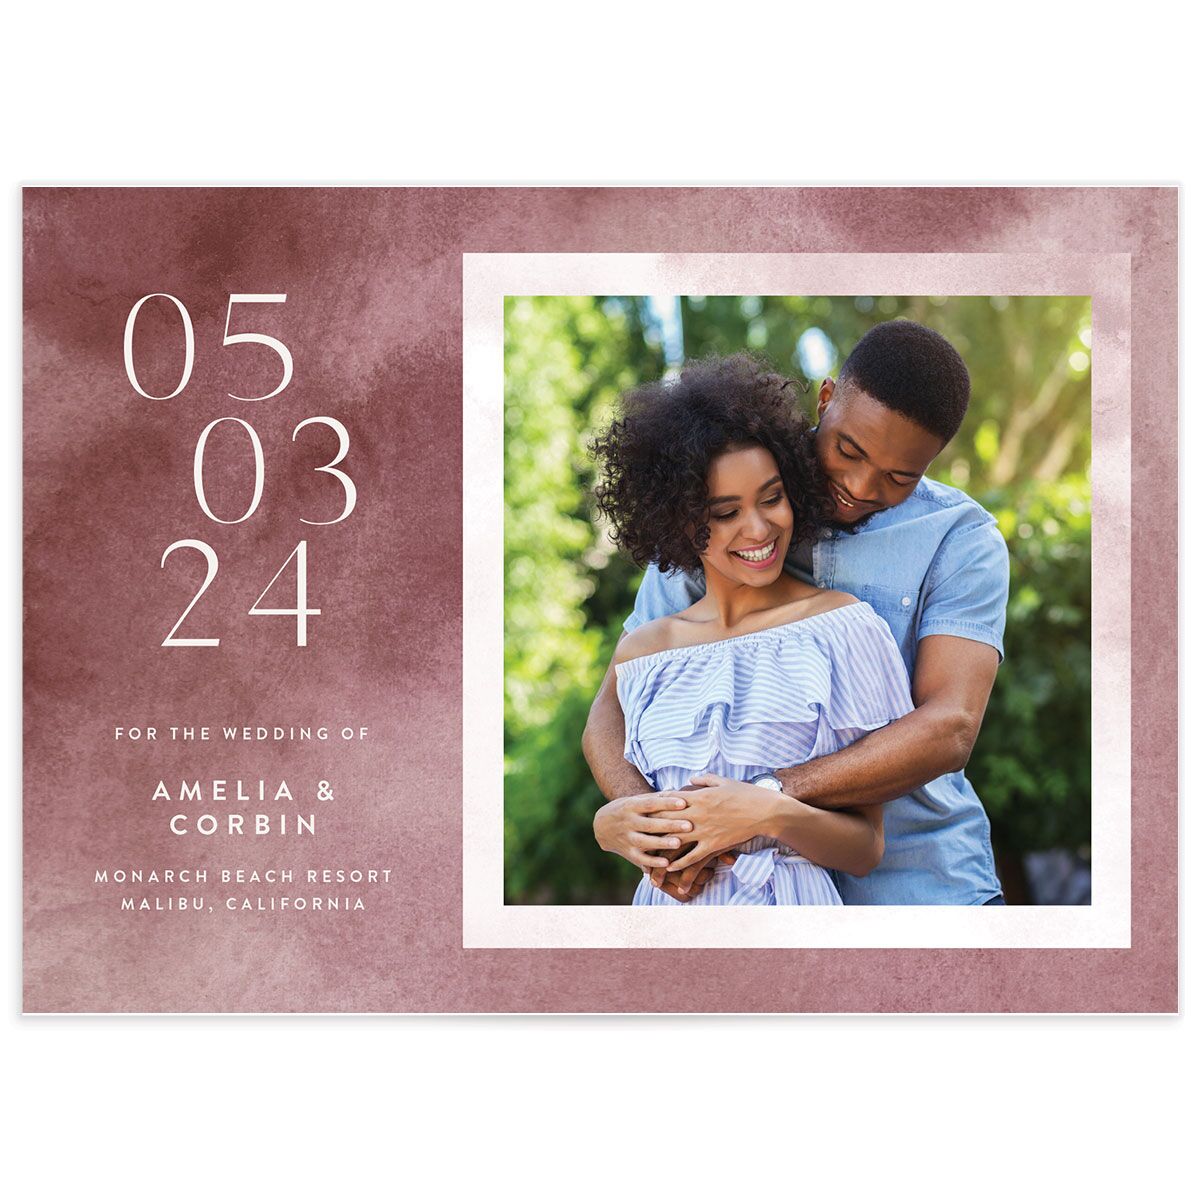 A Save the Date from the Elegant Ethereal Collection